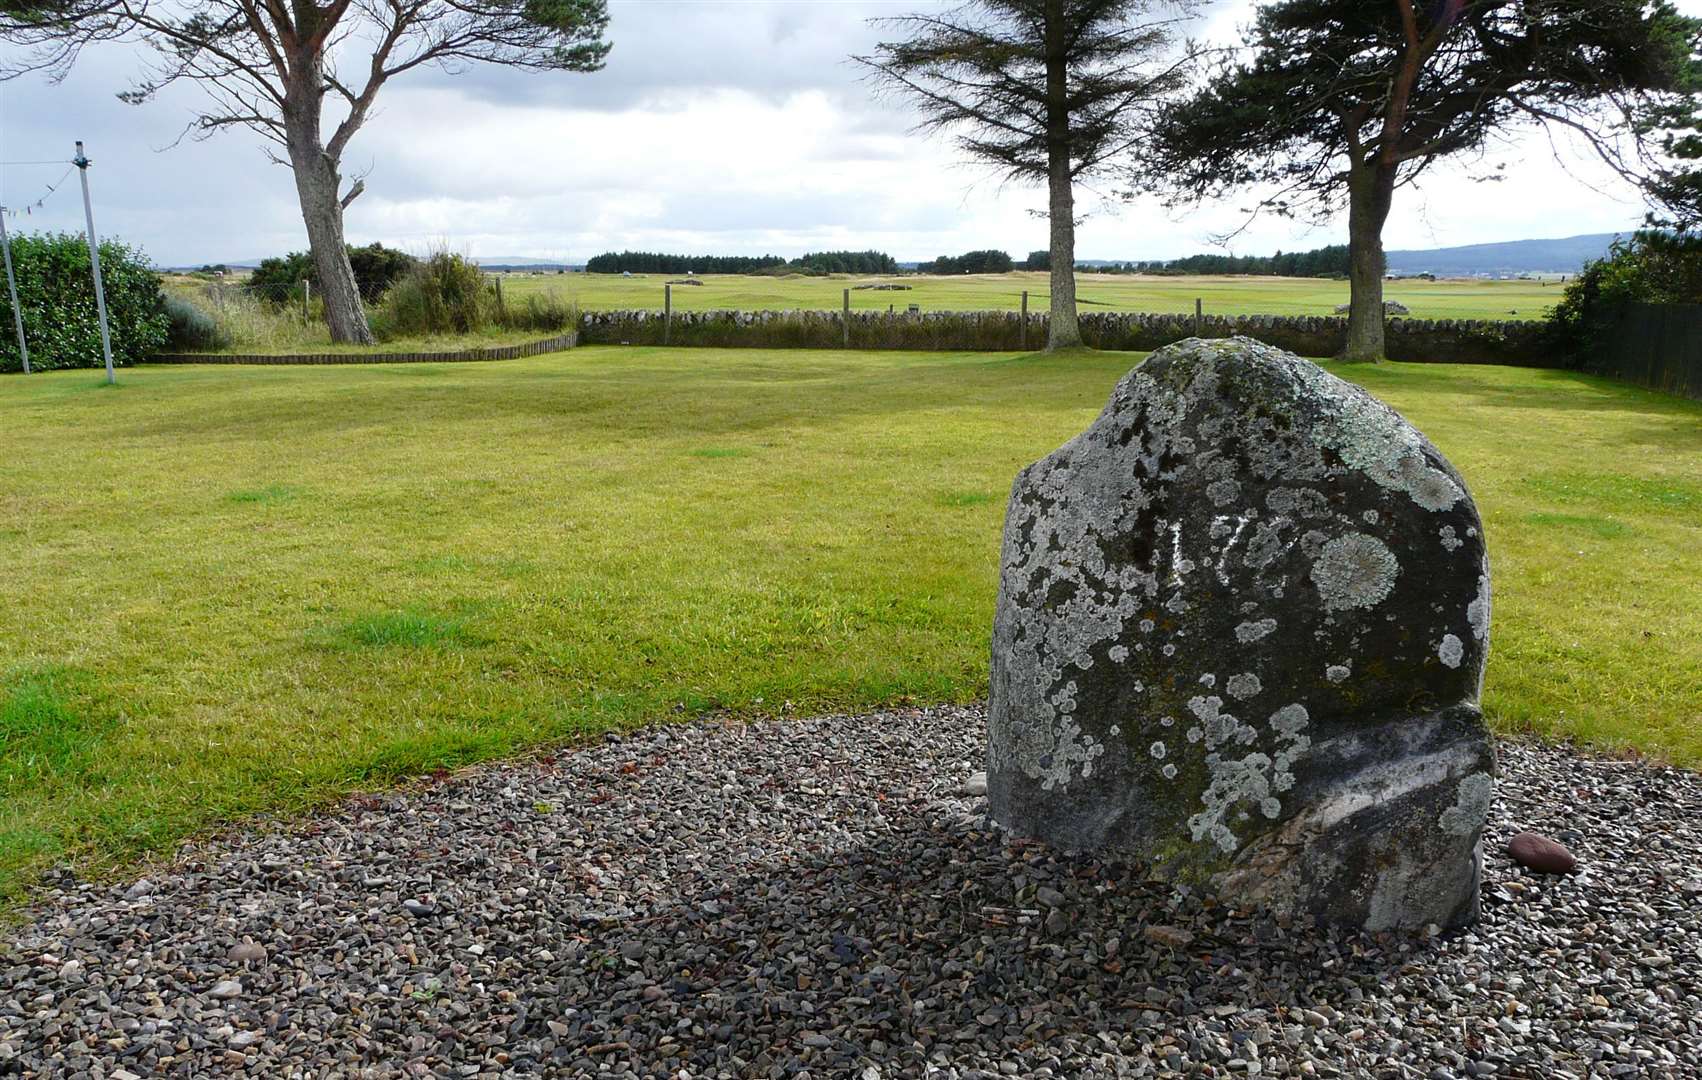 The Witch's Stone, erected in memory of Janet Horne of Dornoch, the last Scot to be executed for witchcraft.